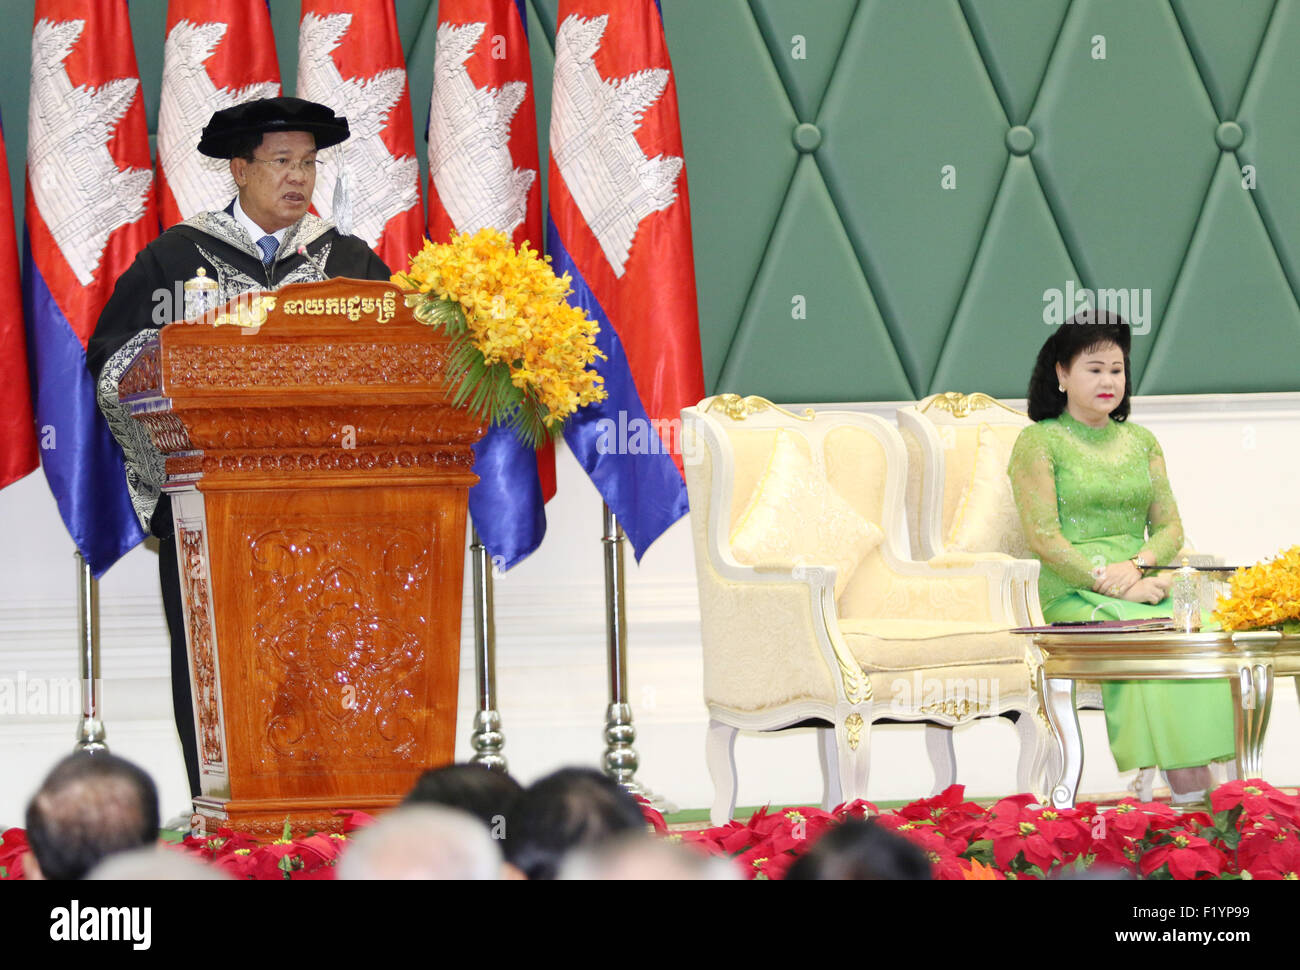 Phnom Penh, Cambodia. 9th Sep, 2015. Cambodian Prime Minister Hun Sen (L) speaks at a ceremony in Phnom Penh, Cambodia, Sept. 9, 2015. Malaysia's prestigious Limkokwing University awarded Hun Sen the Honorary Doctorate Degree of Transformational Leadership on Wednesday in a ceremony held at the Peace Palace in the Cambodian capital. © Sovannara/Xinhua/Alamy Live News Stock Photo